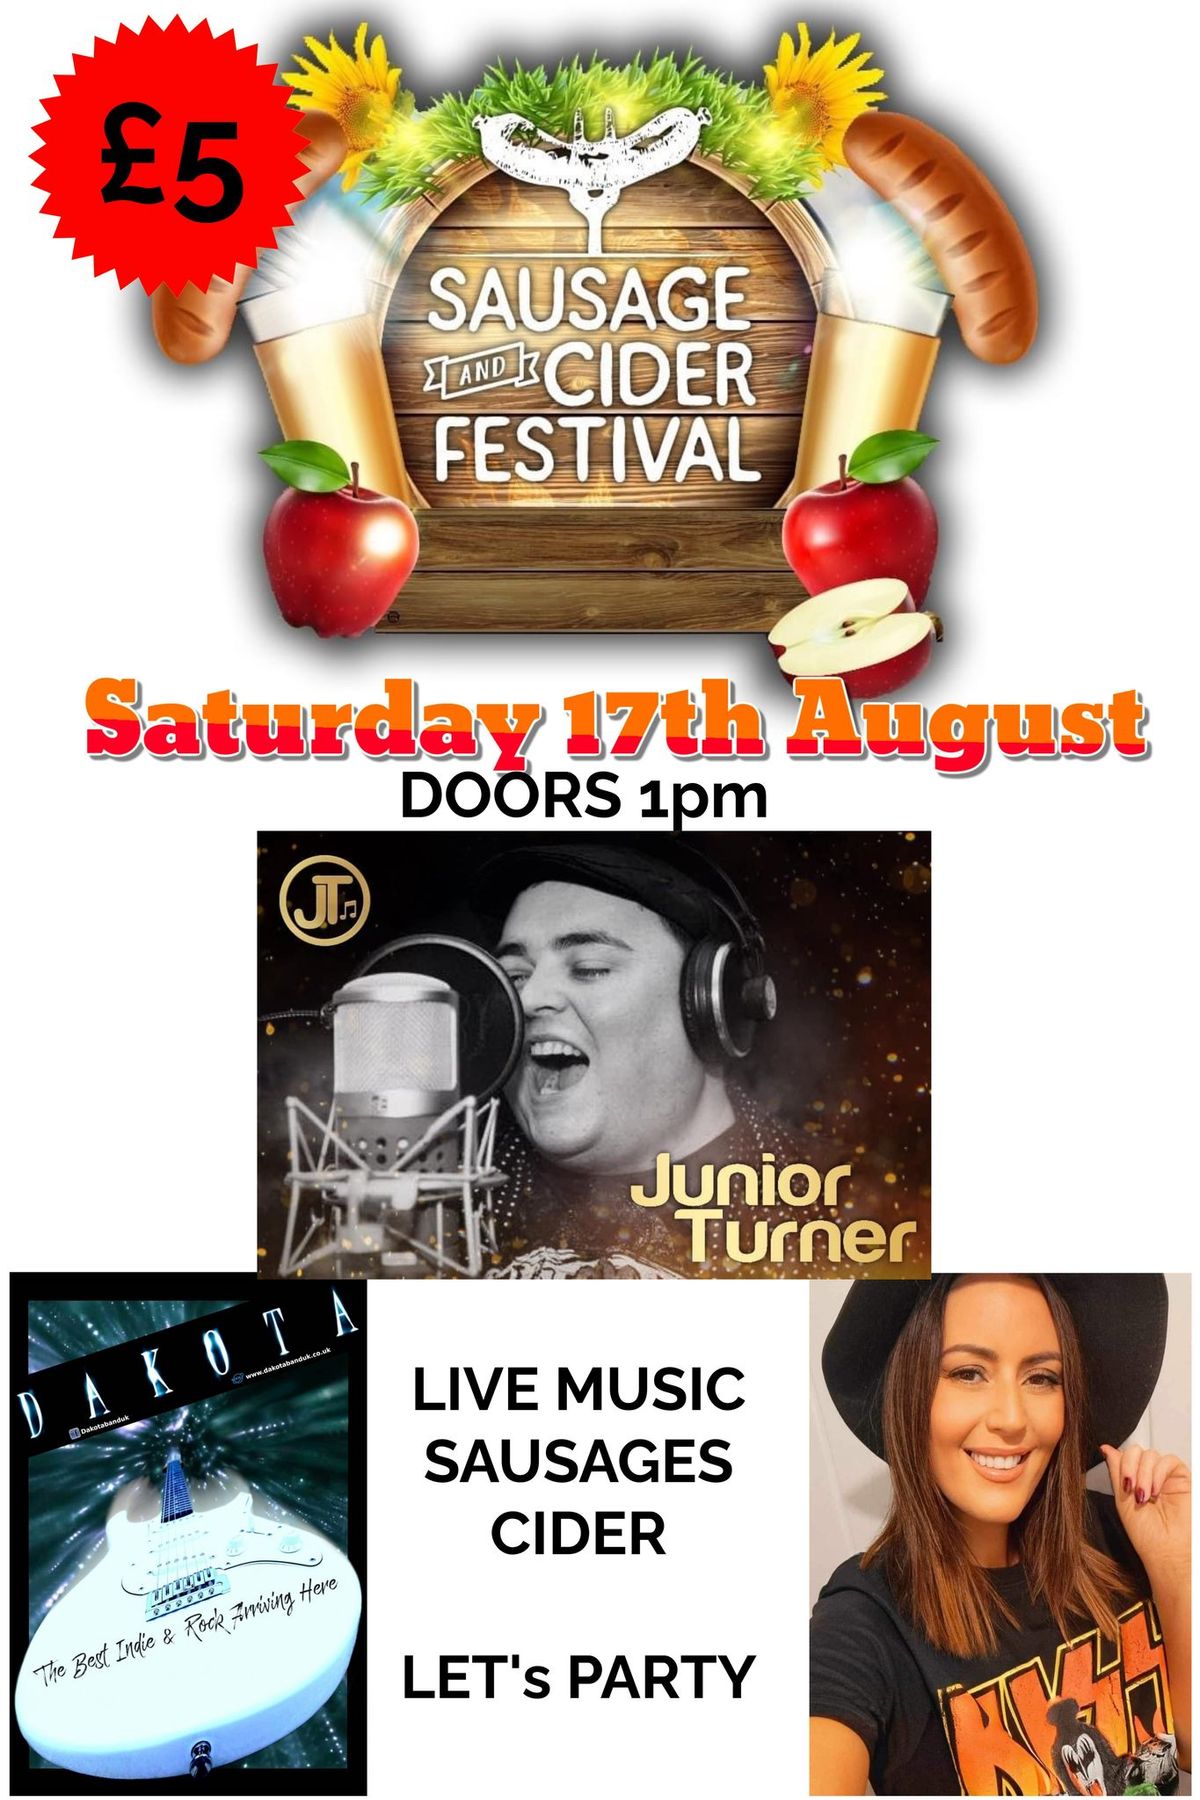 Sausage & Cider Festival With Live Music